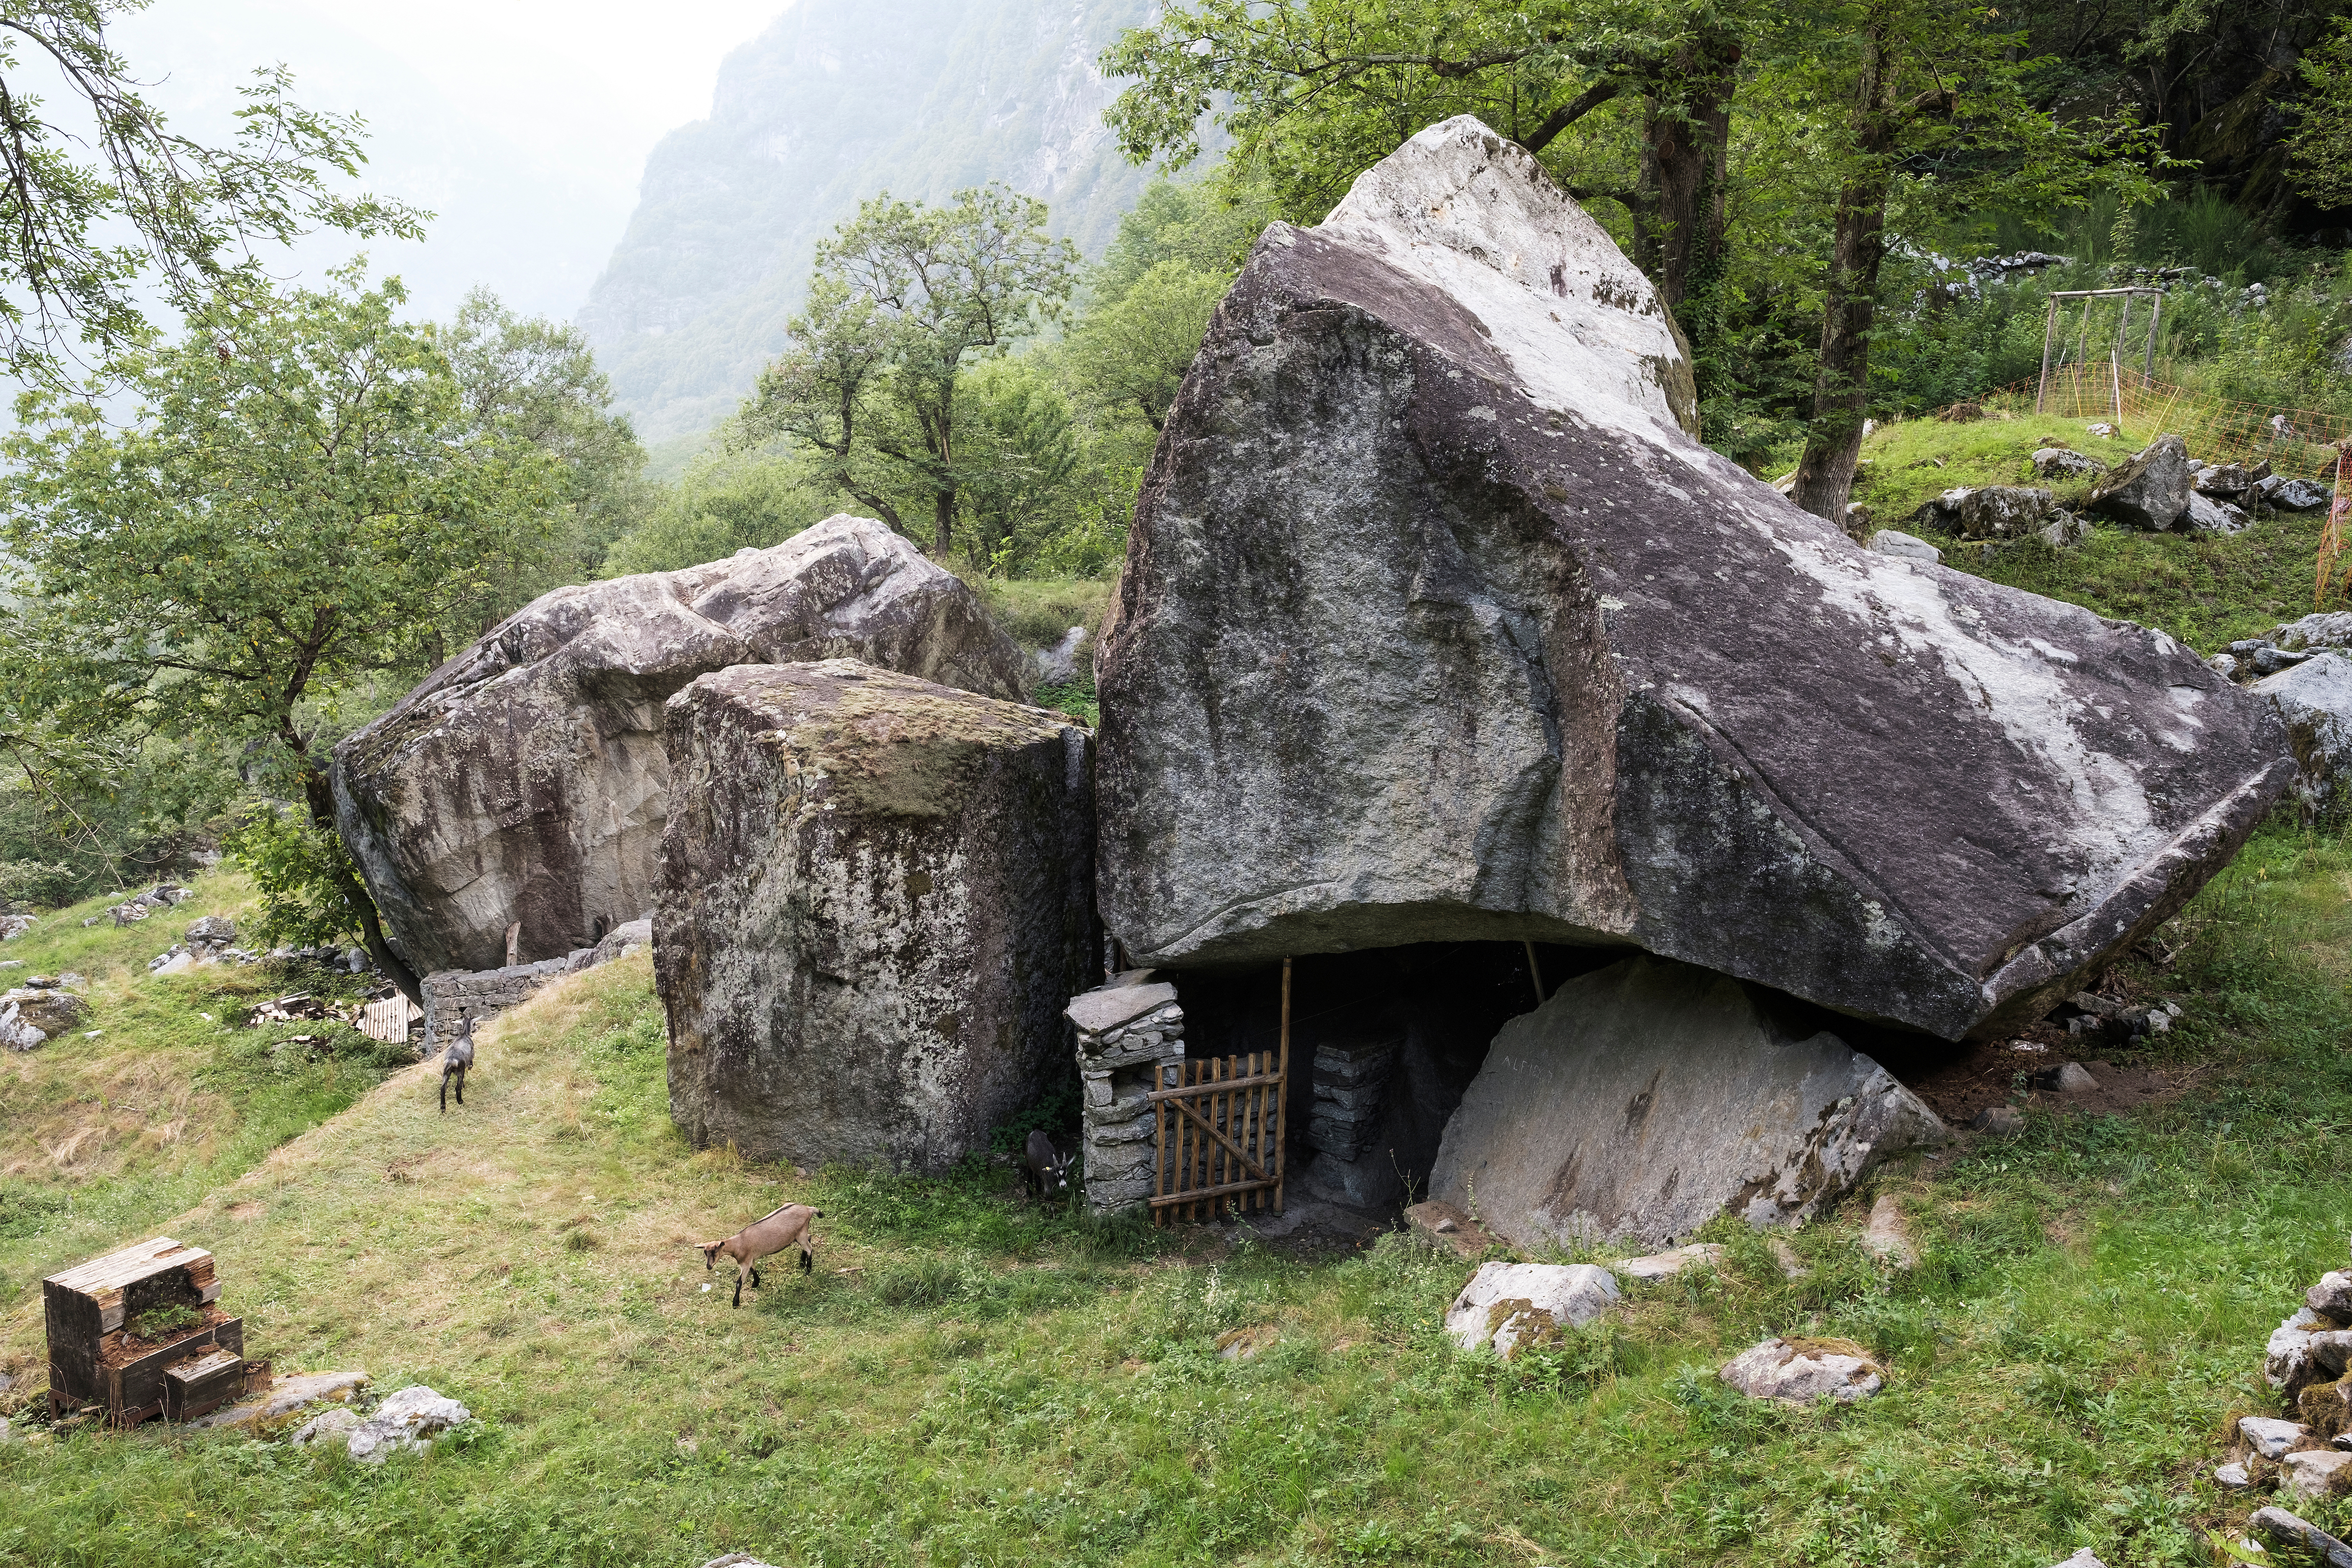 An example of a 'splüi', a cave-like dwelling. © Claudio Bader